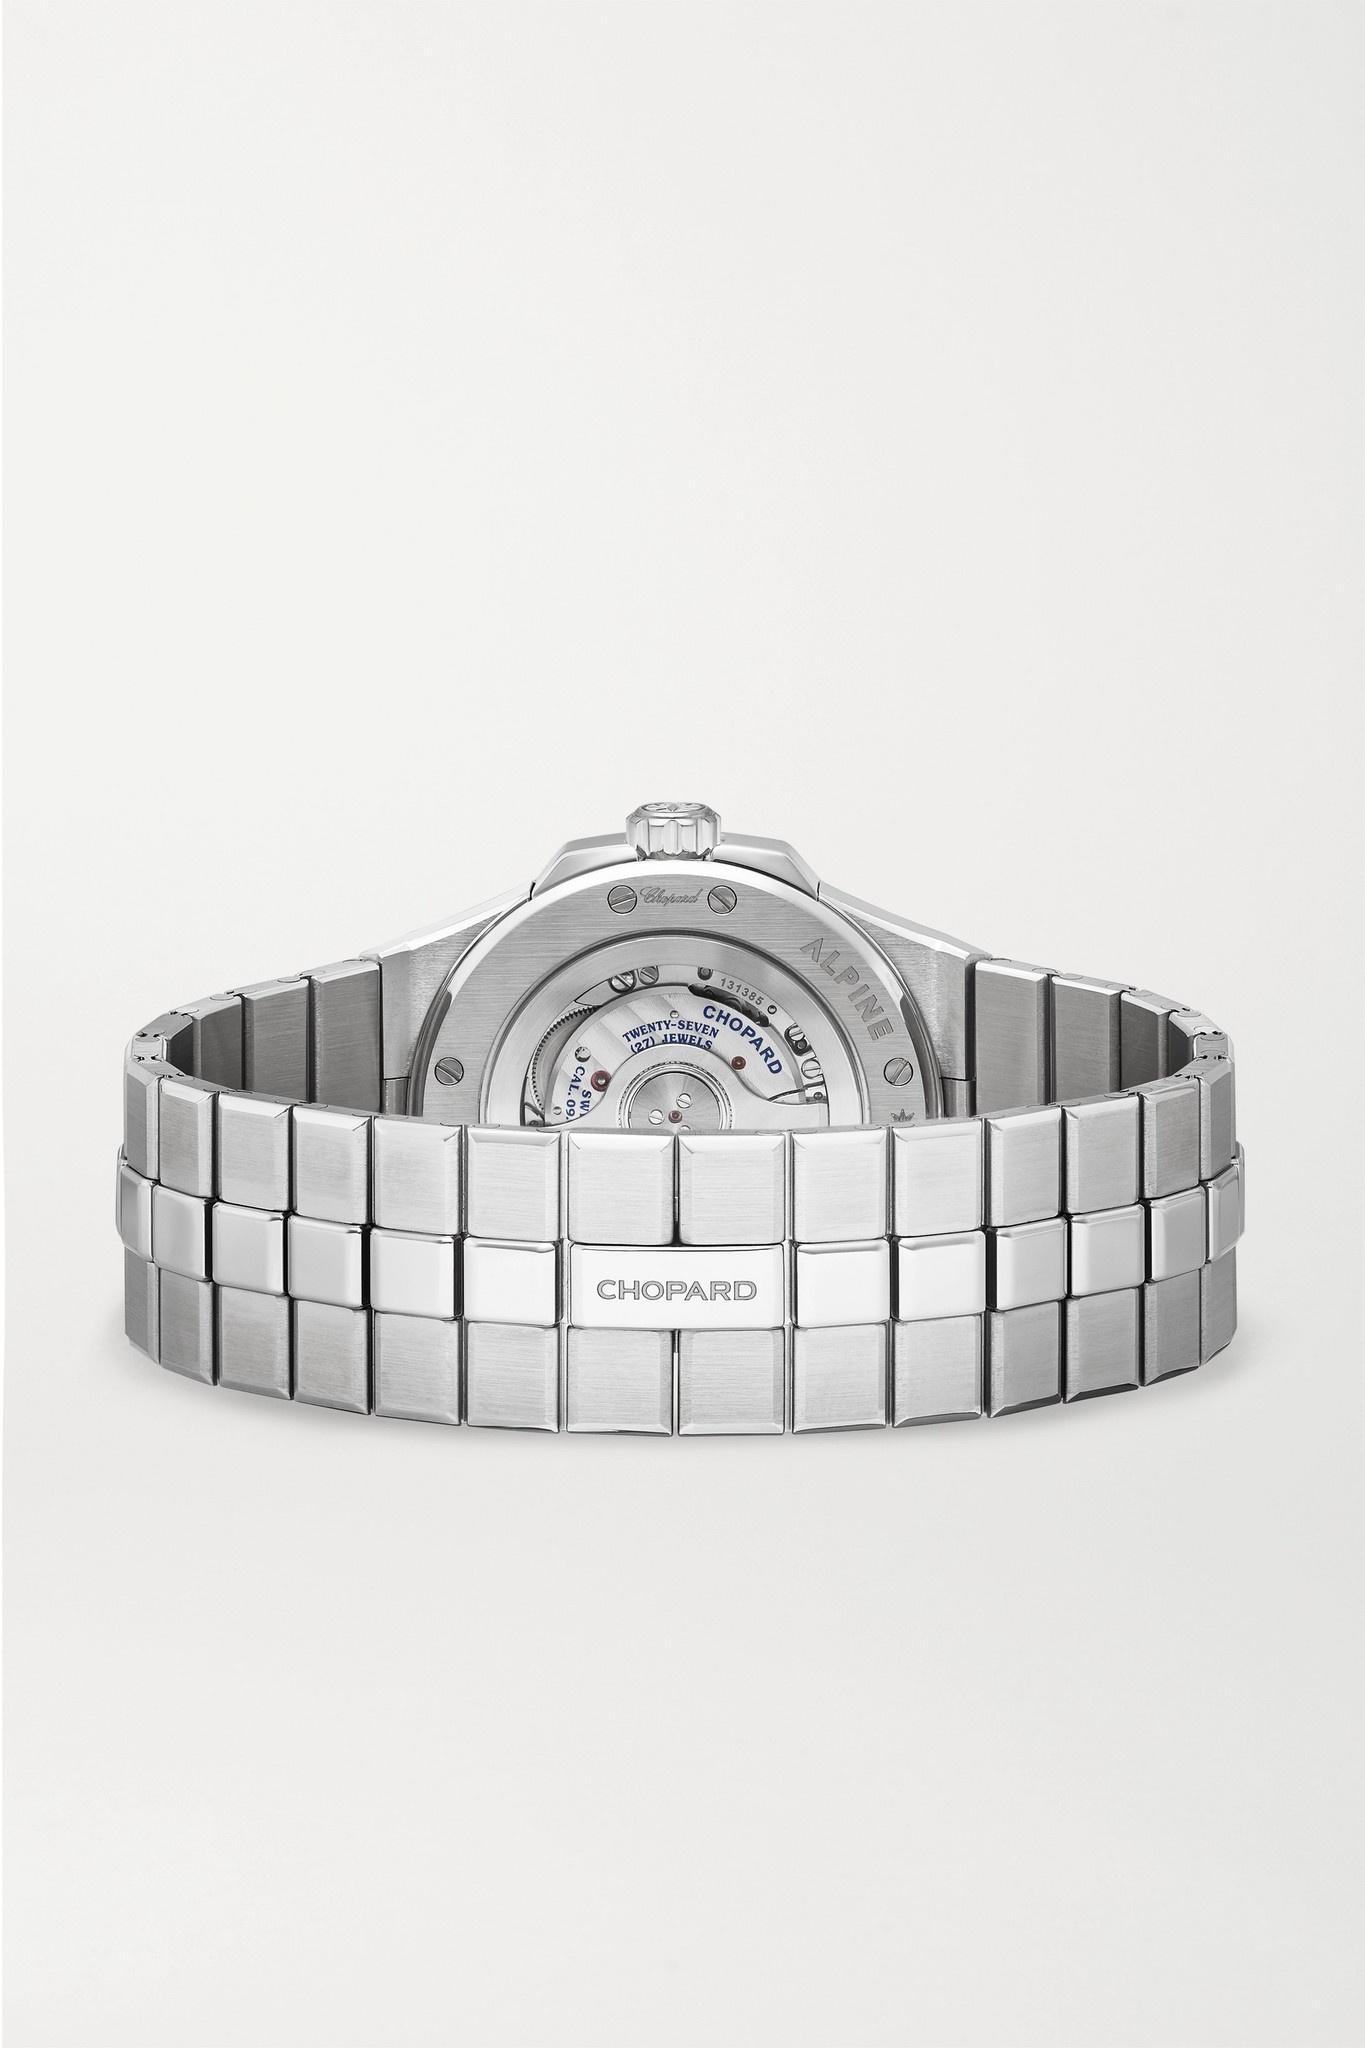 Chopard Alpine Eagle Automatic 36mm small stainless steel, mother-of-pearl  and diamond watch